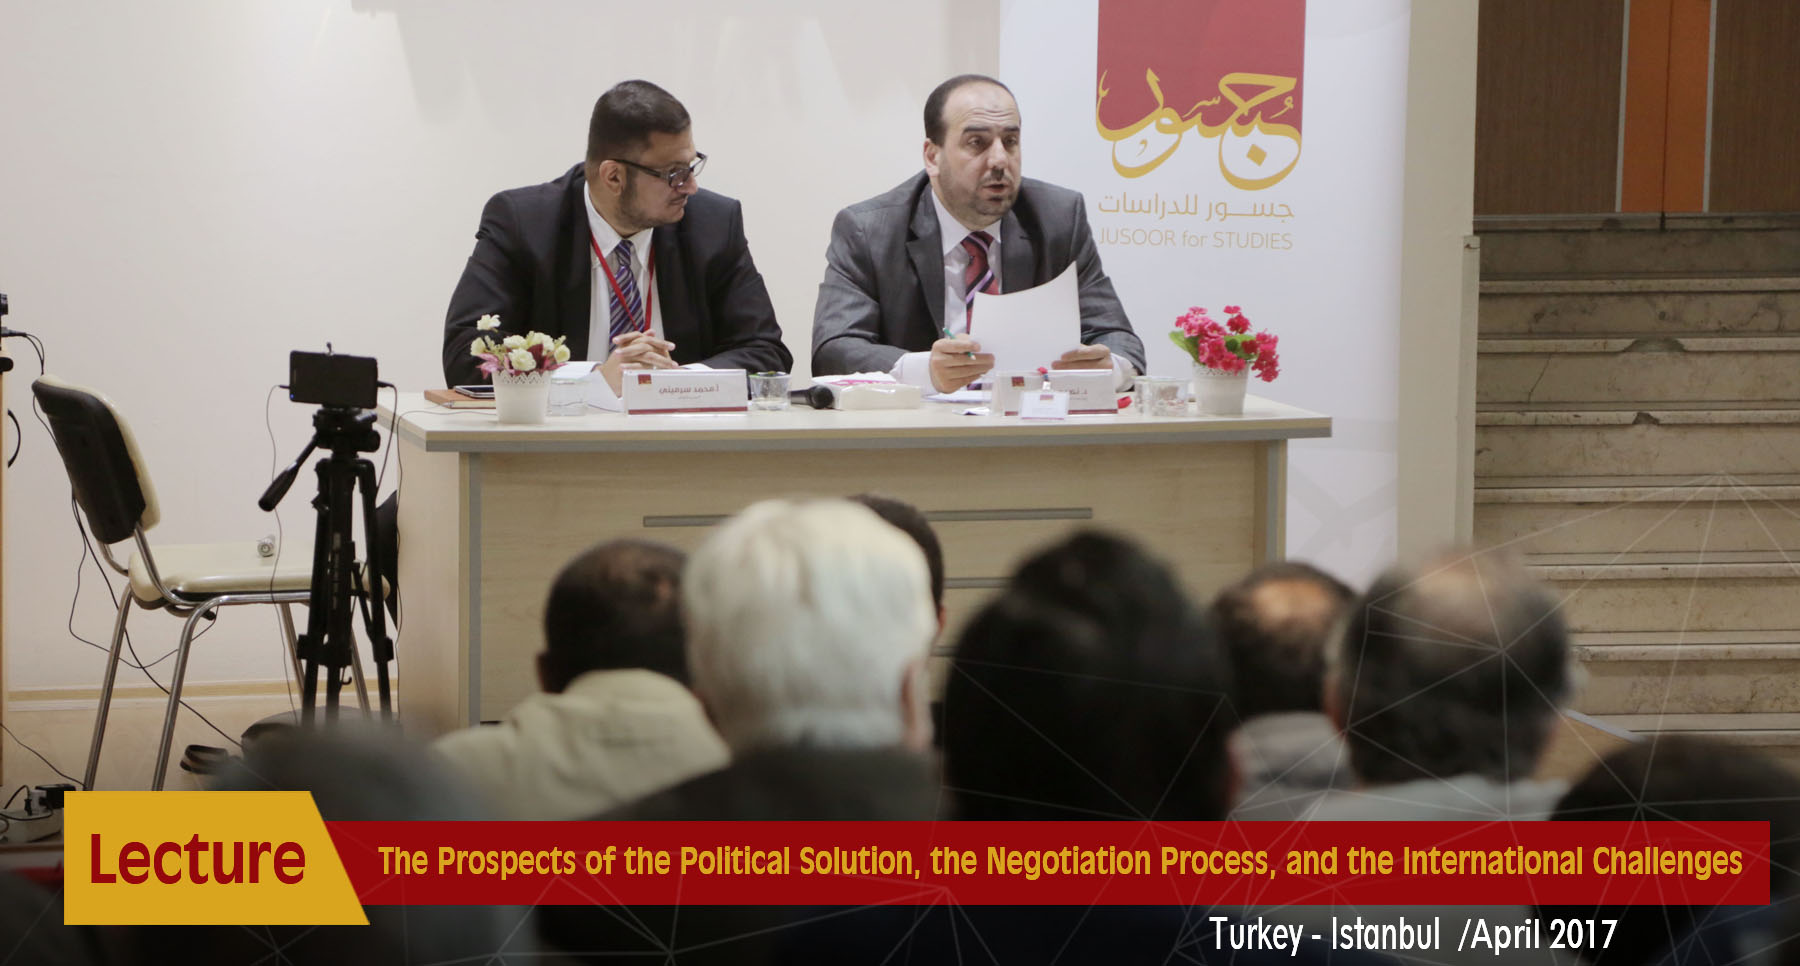 Seminar on the Prospects of the Political Solution, the Negotiation Process, and the International Challenges